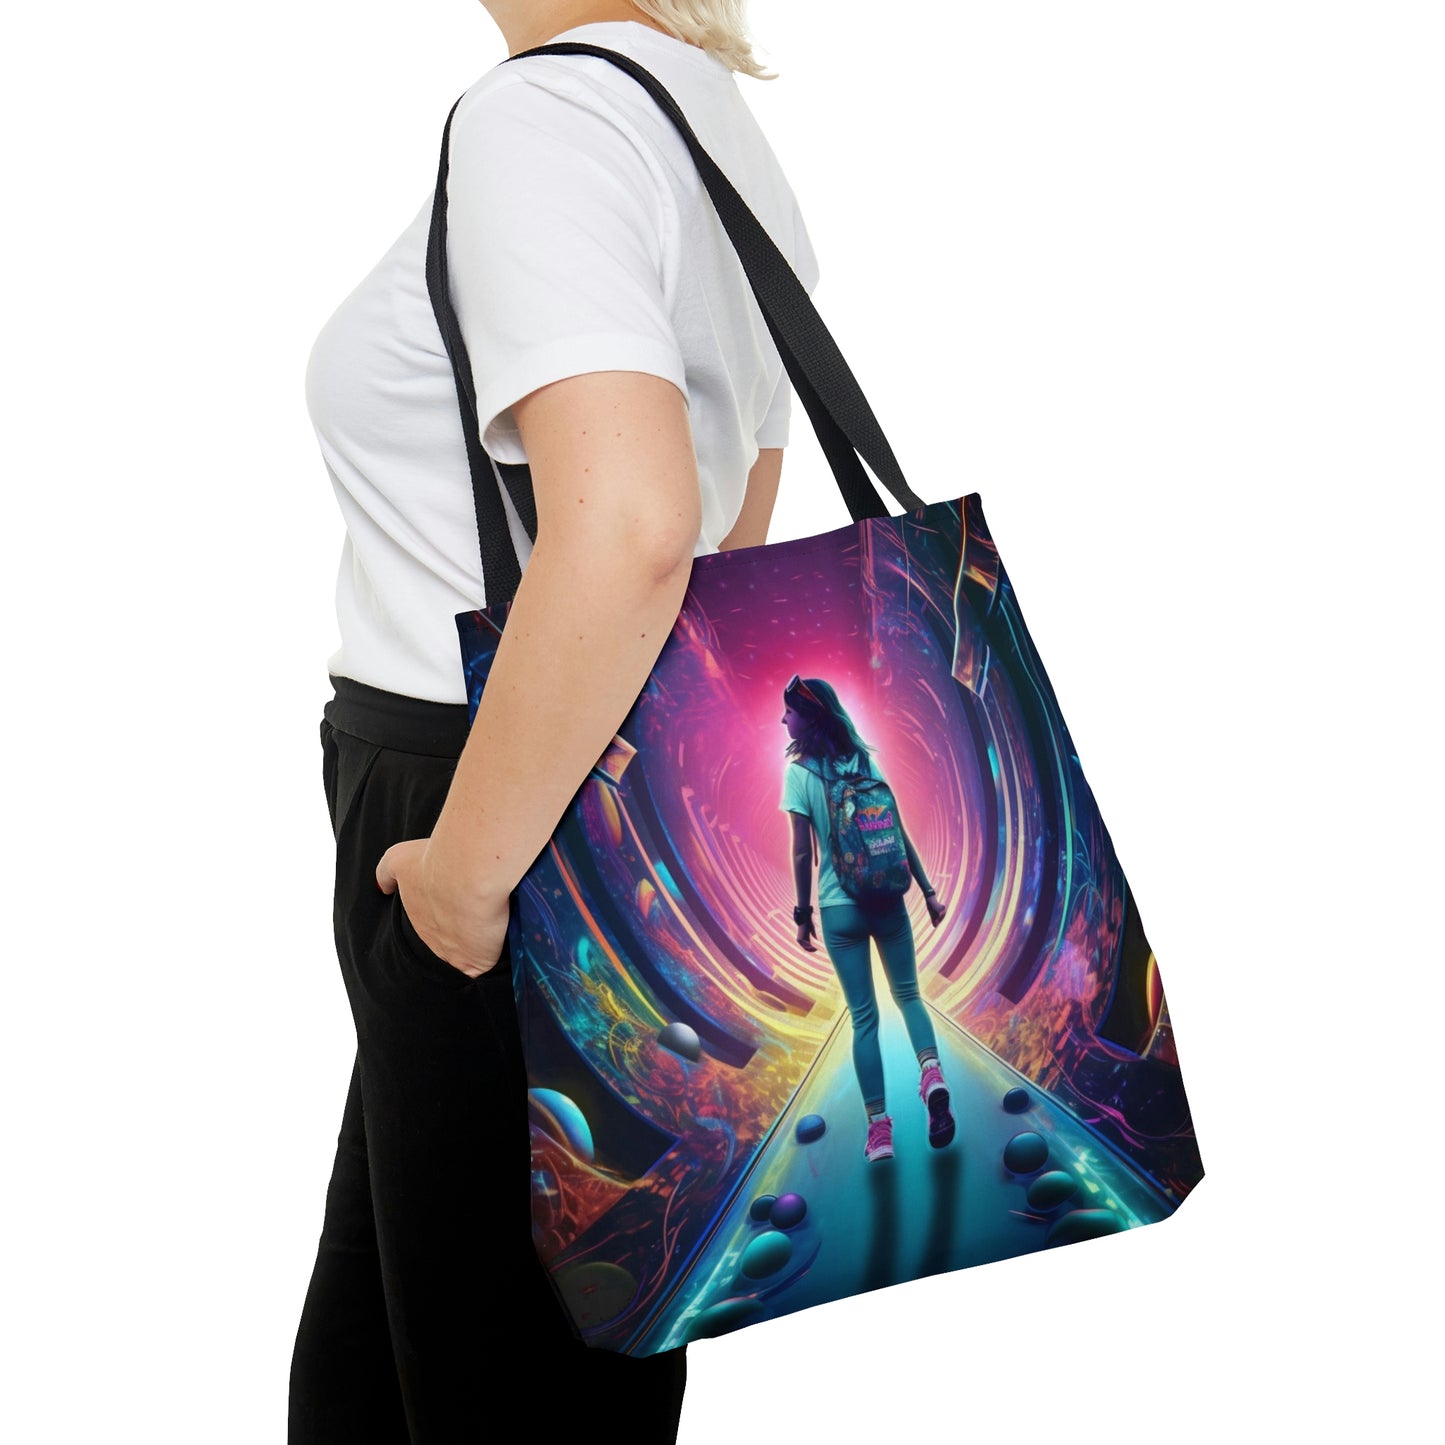 Star Path Tote Bag.  Take your imagination and go wherever it leads you.